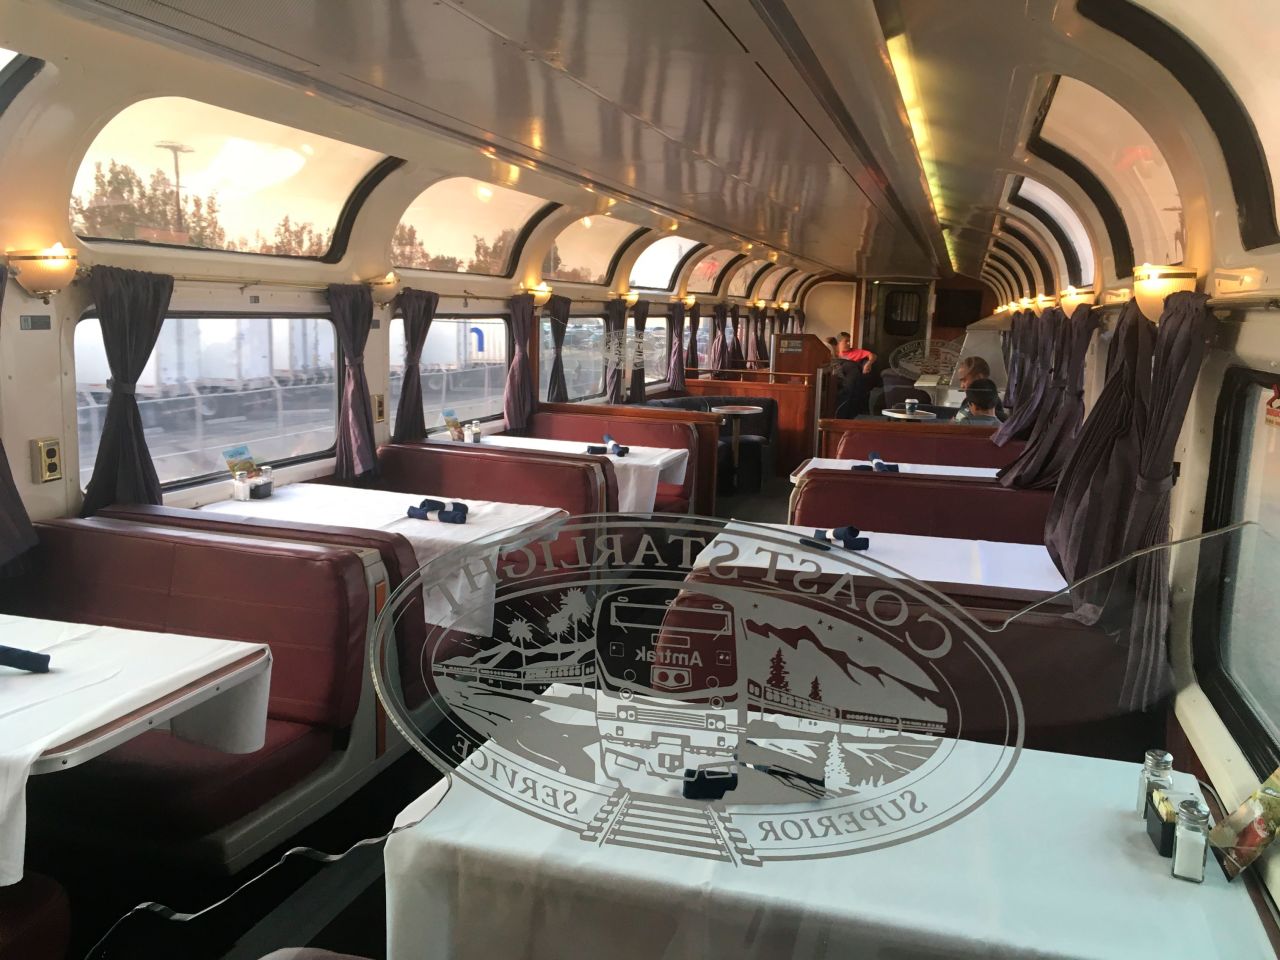 The dining car of the Coast Starlight, where passengers were allowed to eat and chat together pre-pandemic, photographed on December 16, 2017.